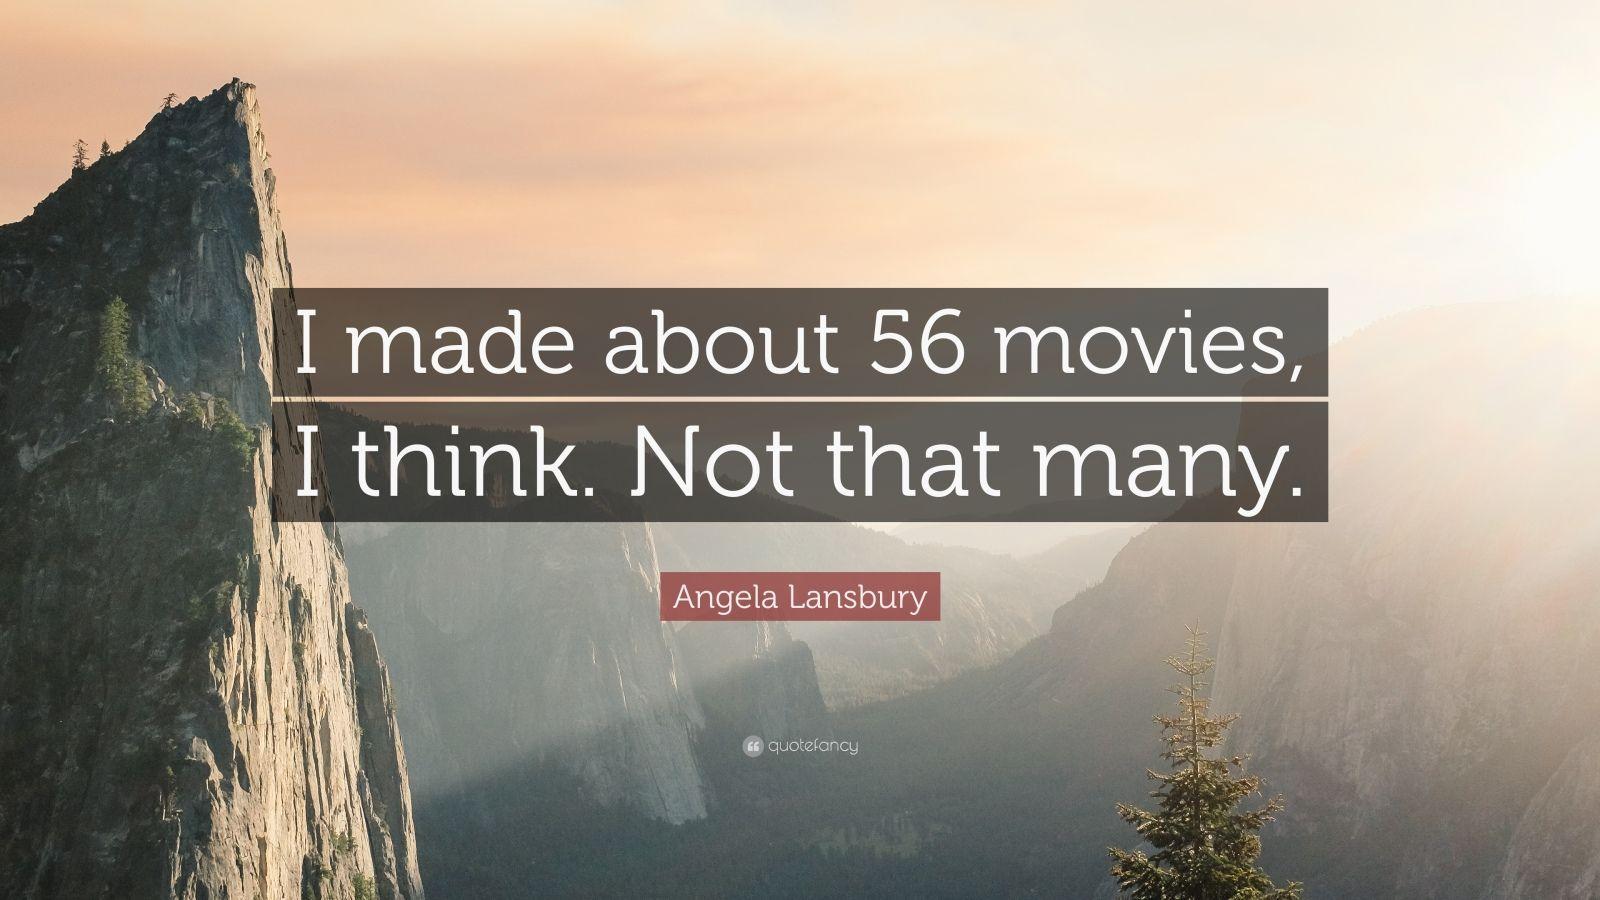 Angela Lansbury Quote: “I made about 56 movies, I think. Not that